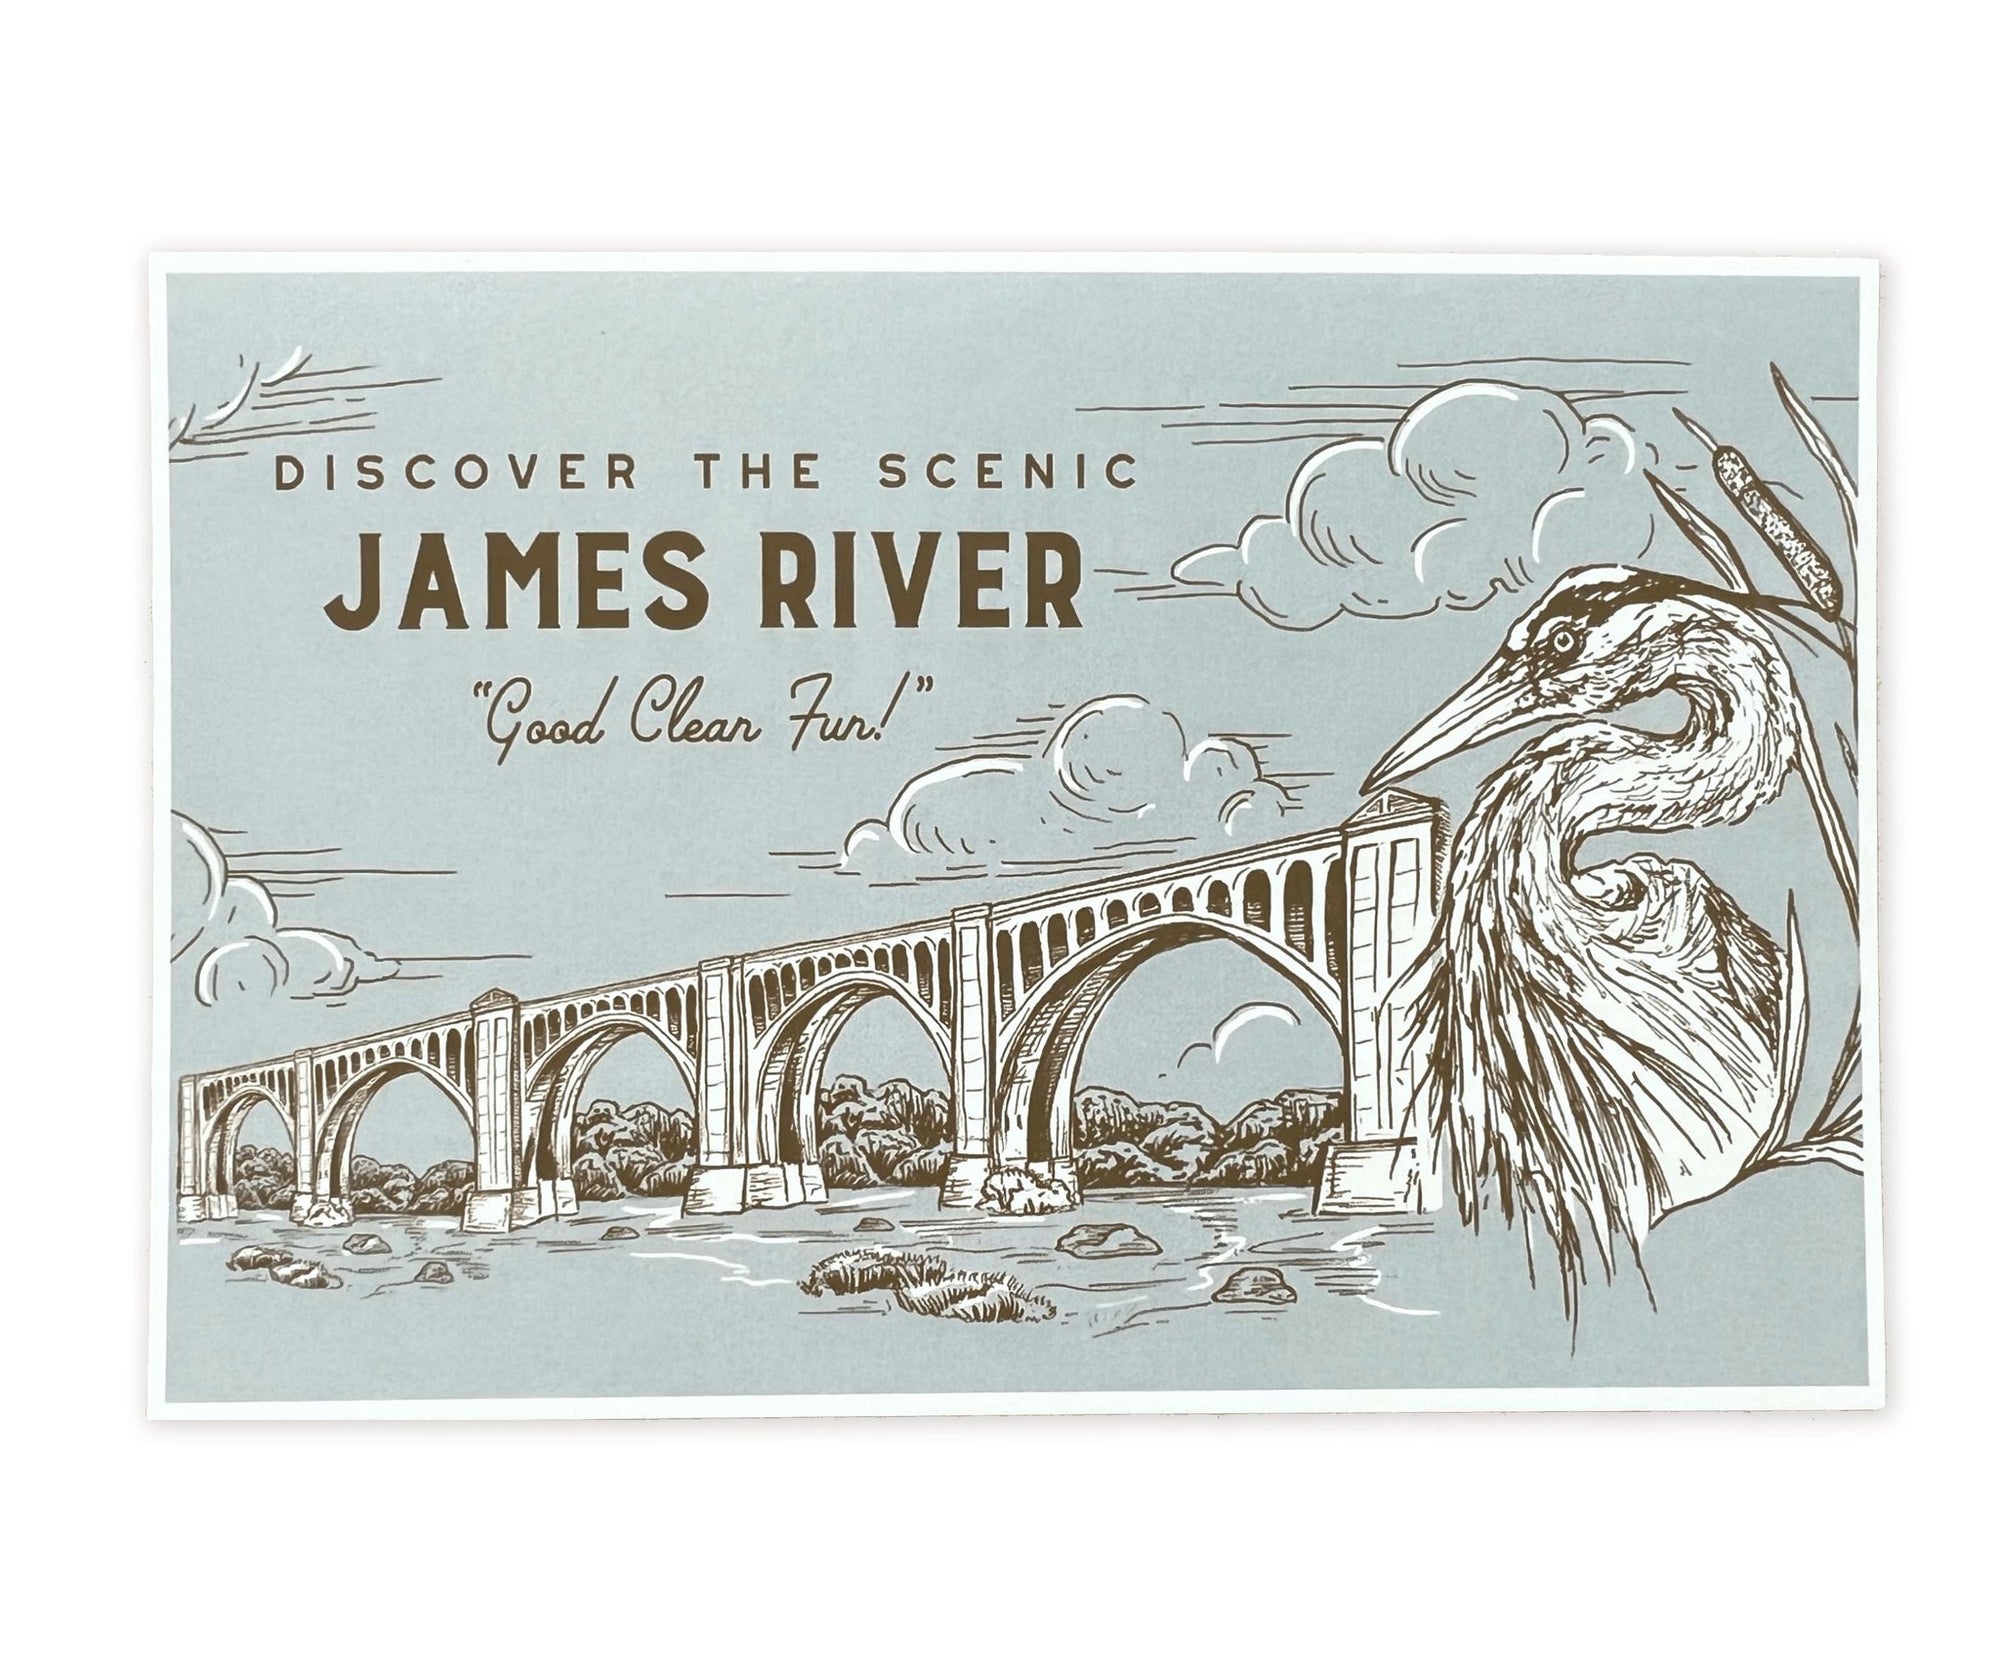 Discover the scenic James River with The Wild Wander's Good Clean Fun Postcard.